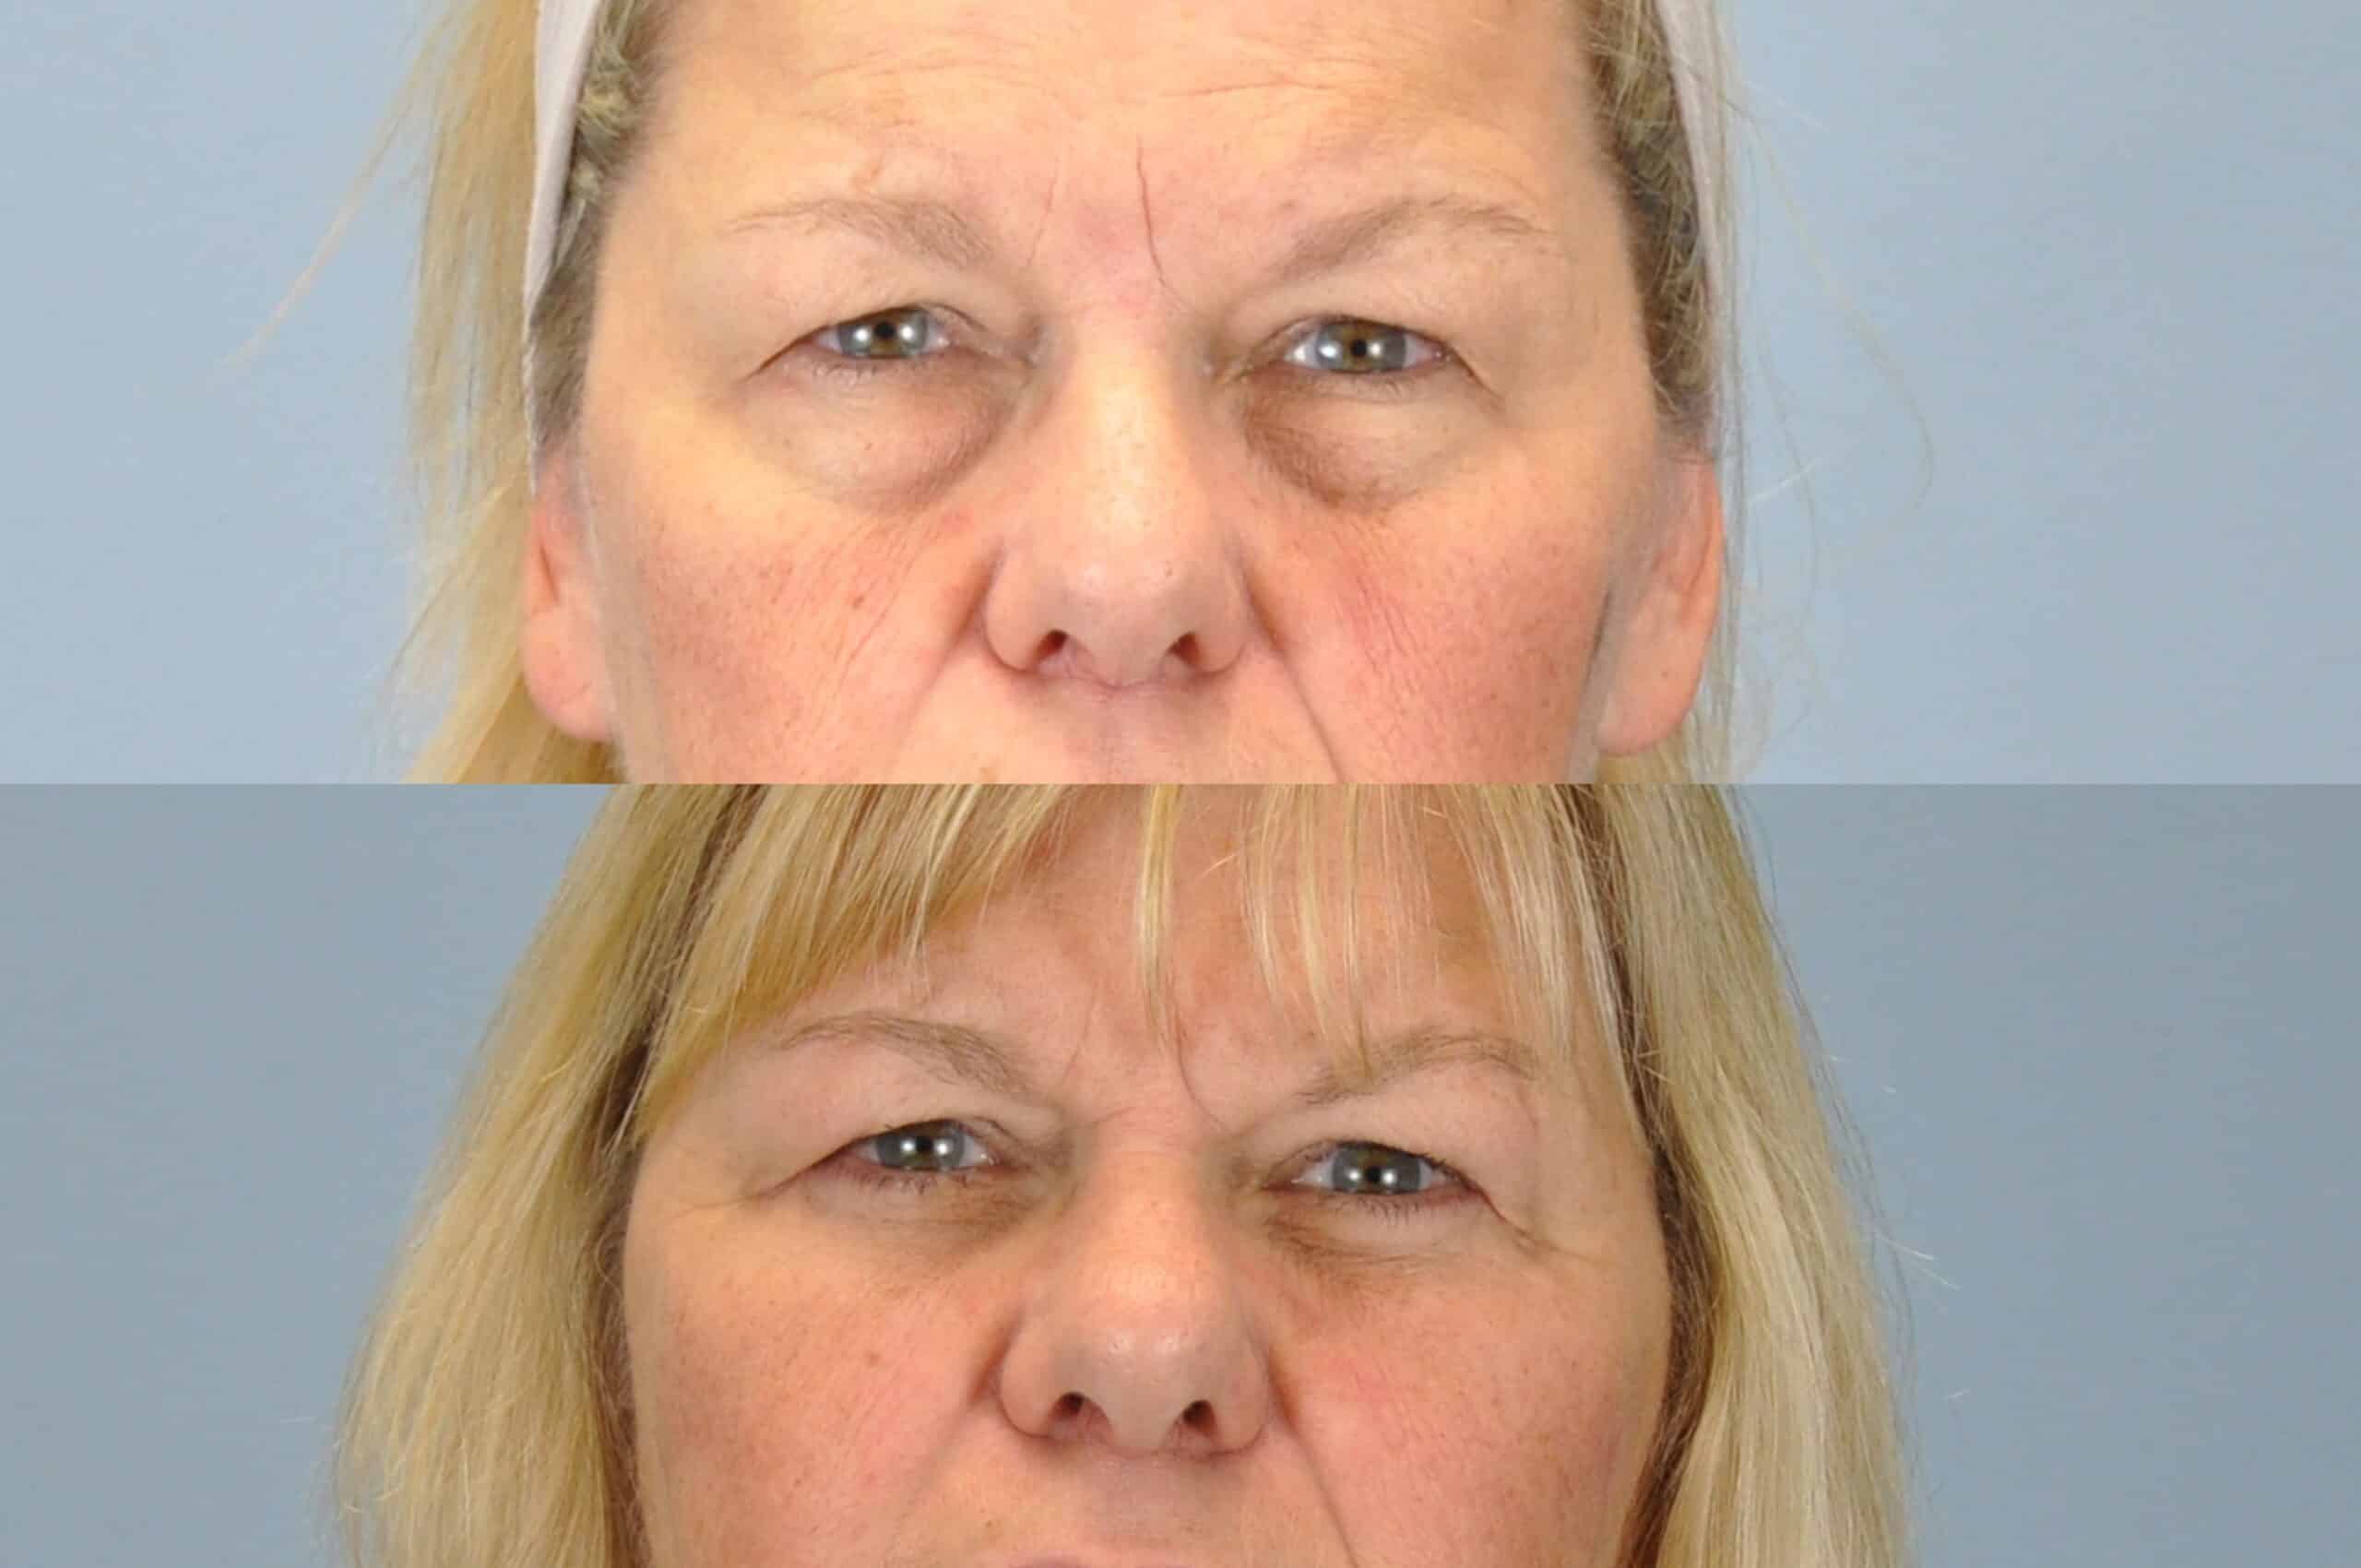 Before and after, 7 mo post op from Endo Brow Lift, Lower Blepharoplasty, Canthopexy performed by Dr. Paul Vanek (front view)